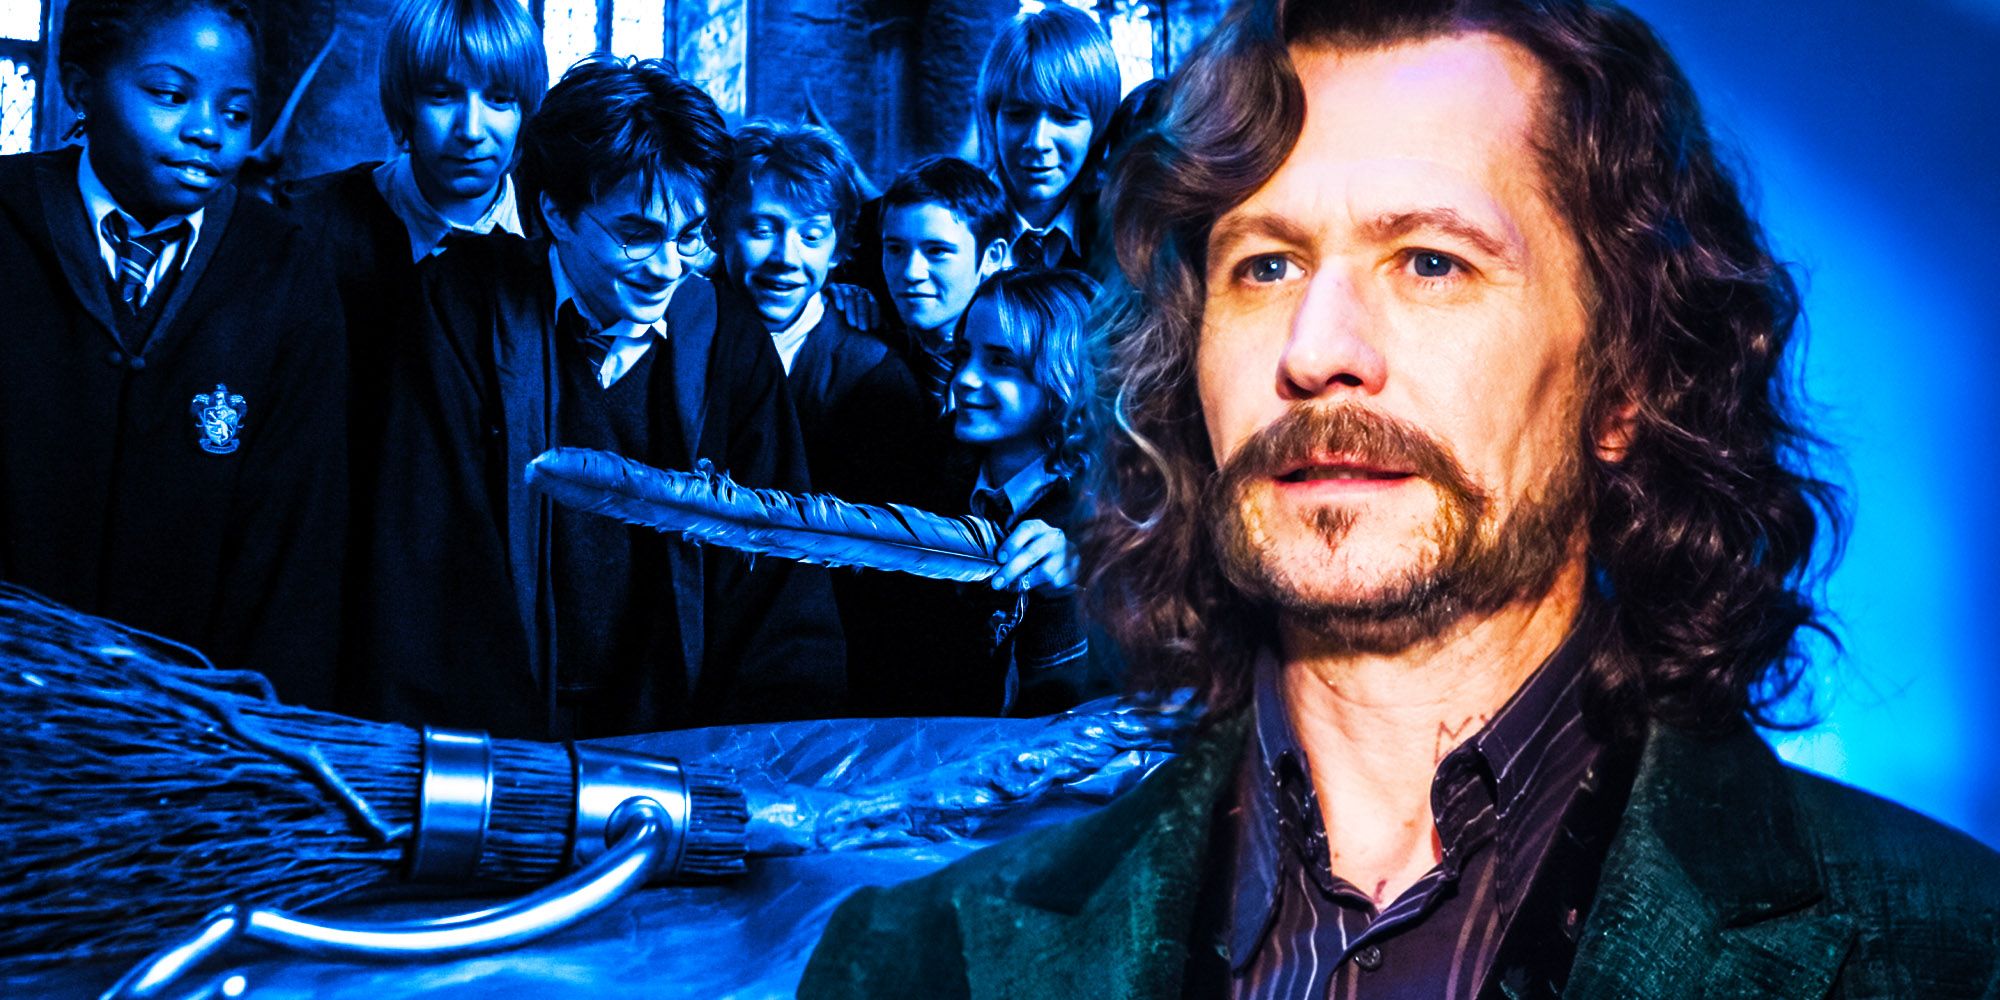 How Did Sirius Black Buy Harry Potter The Firebolt? Is It A Plot Hole?